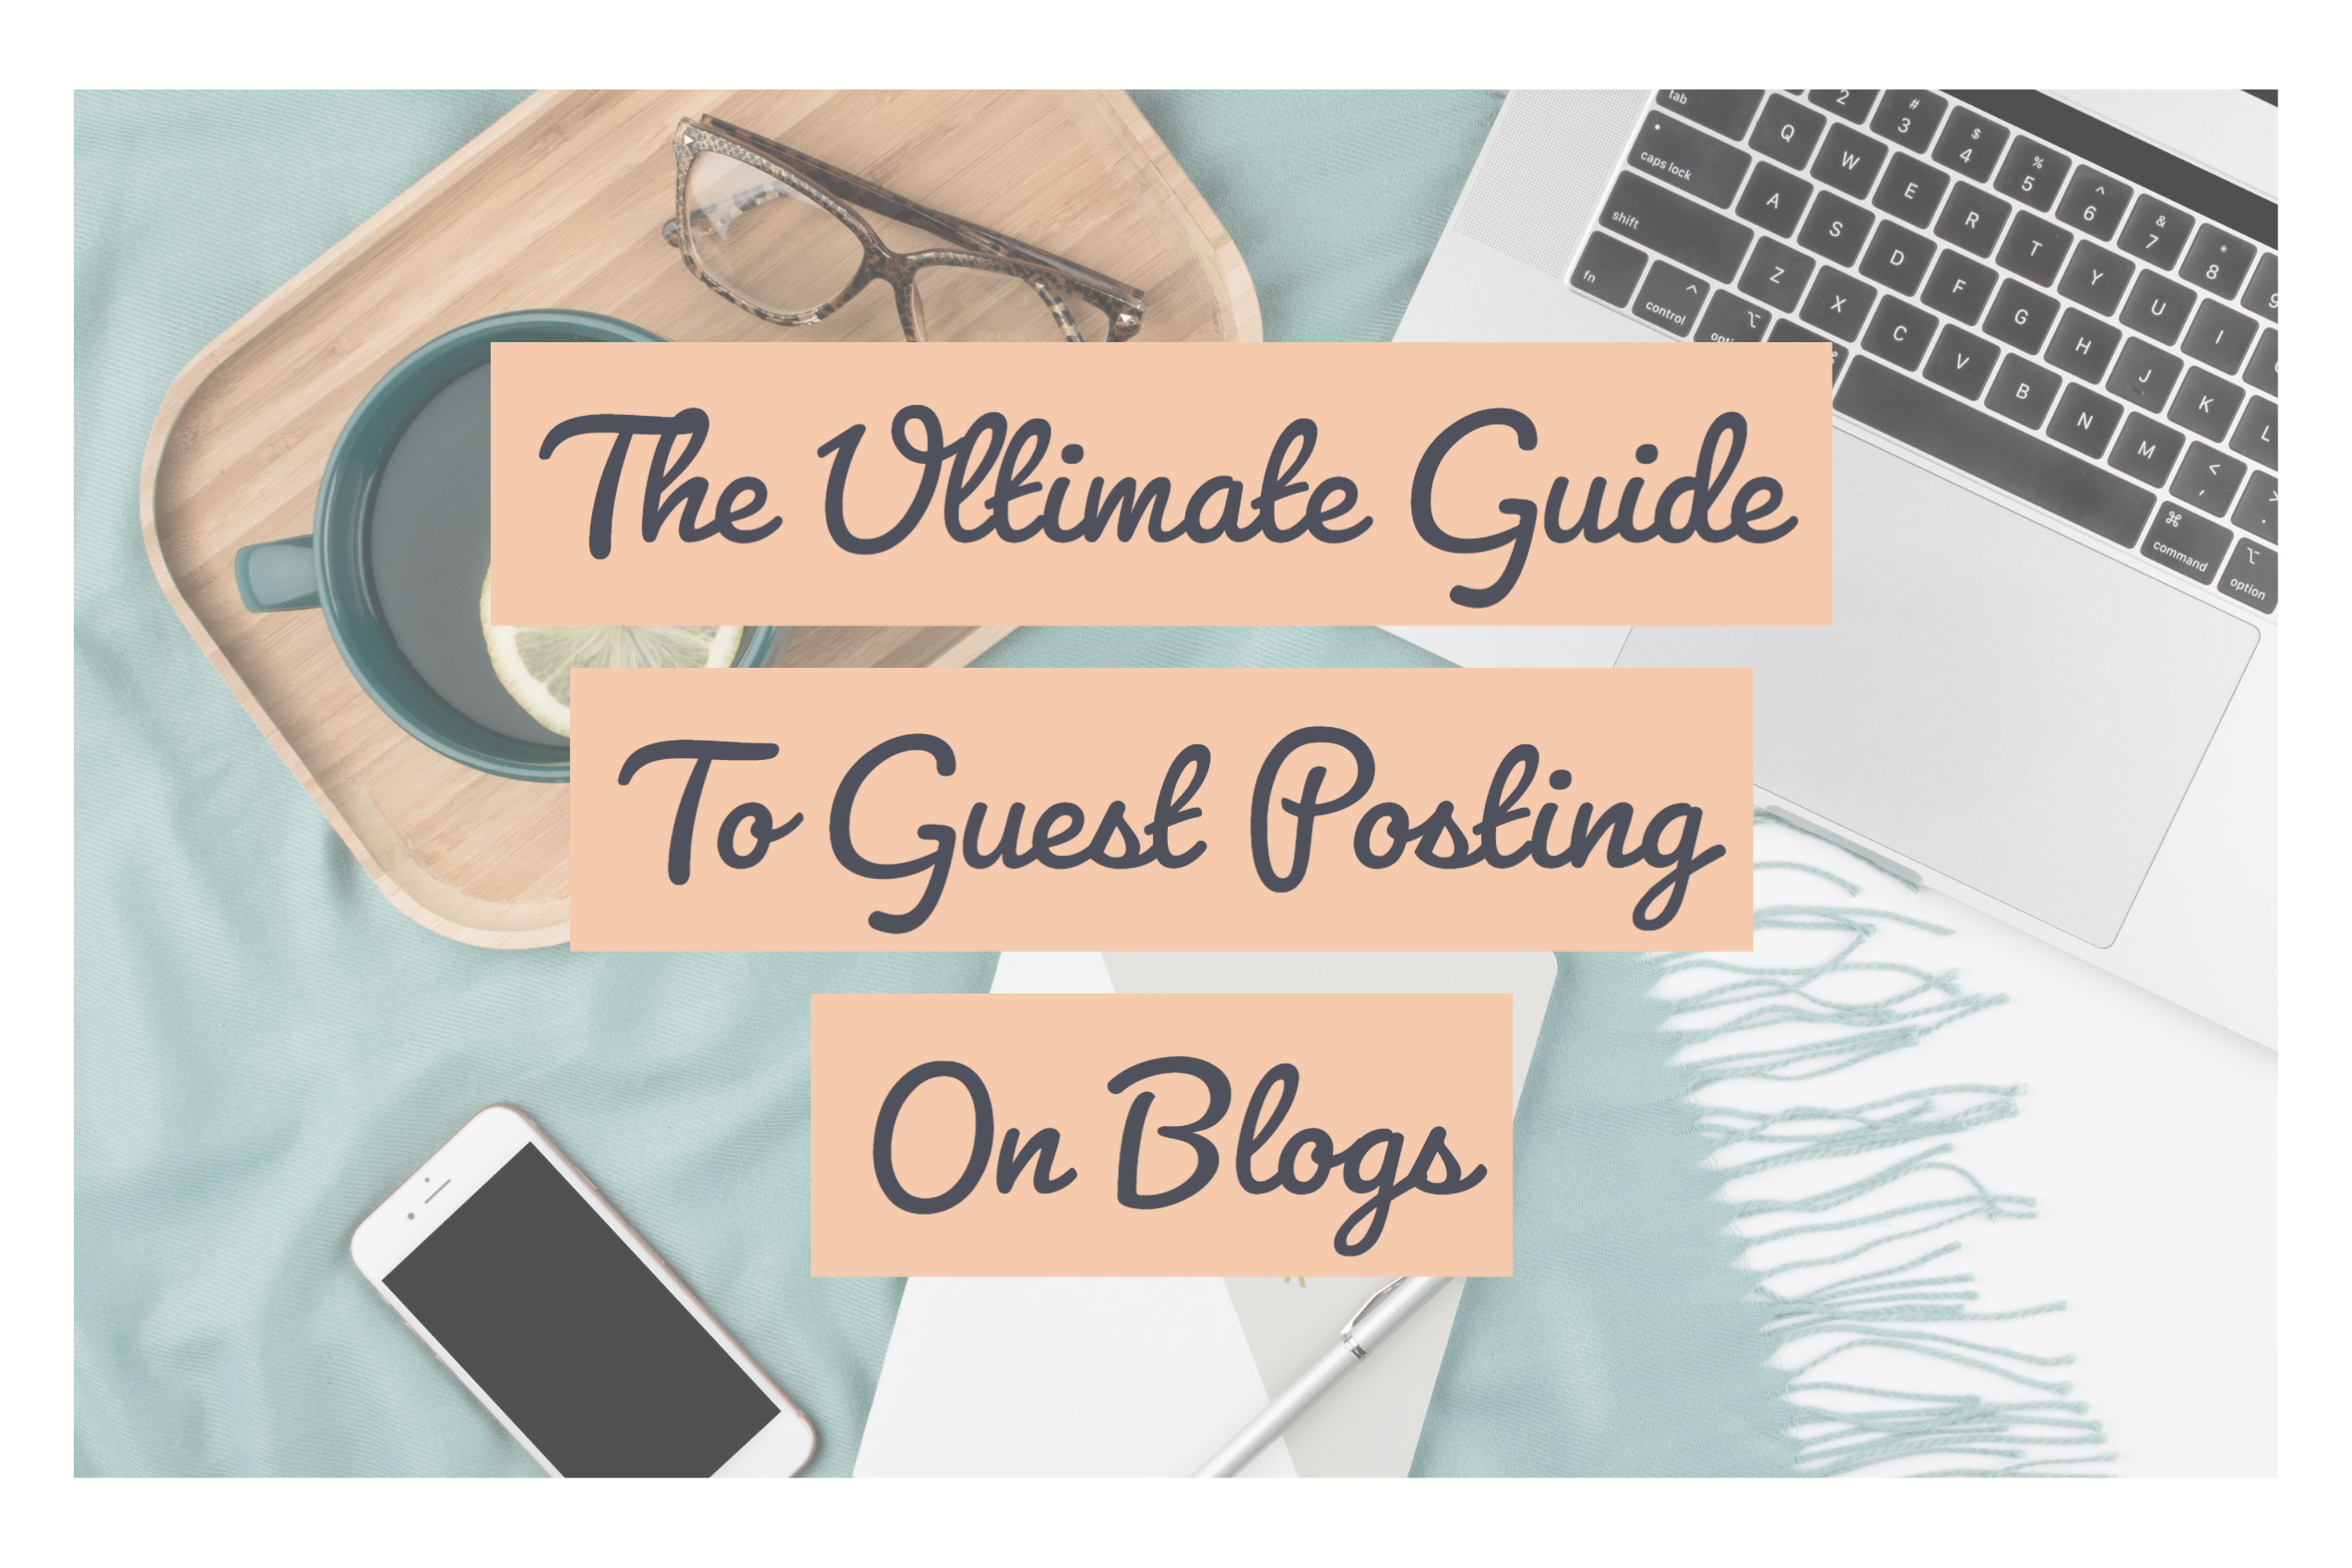 The Ultimate Guide To Guest Posting On Blogs